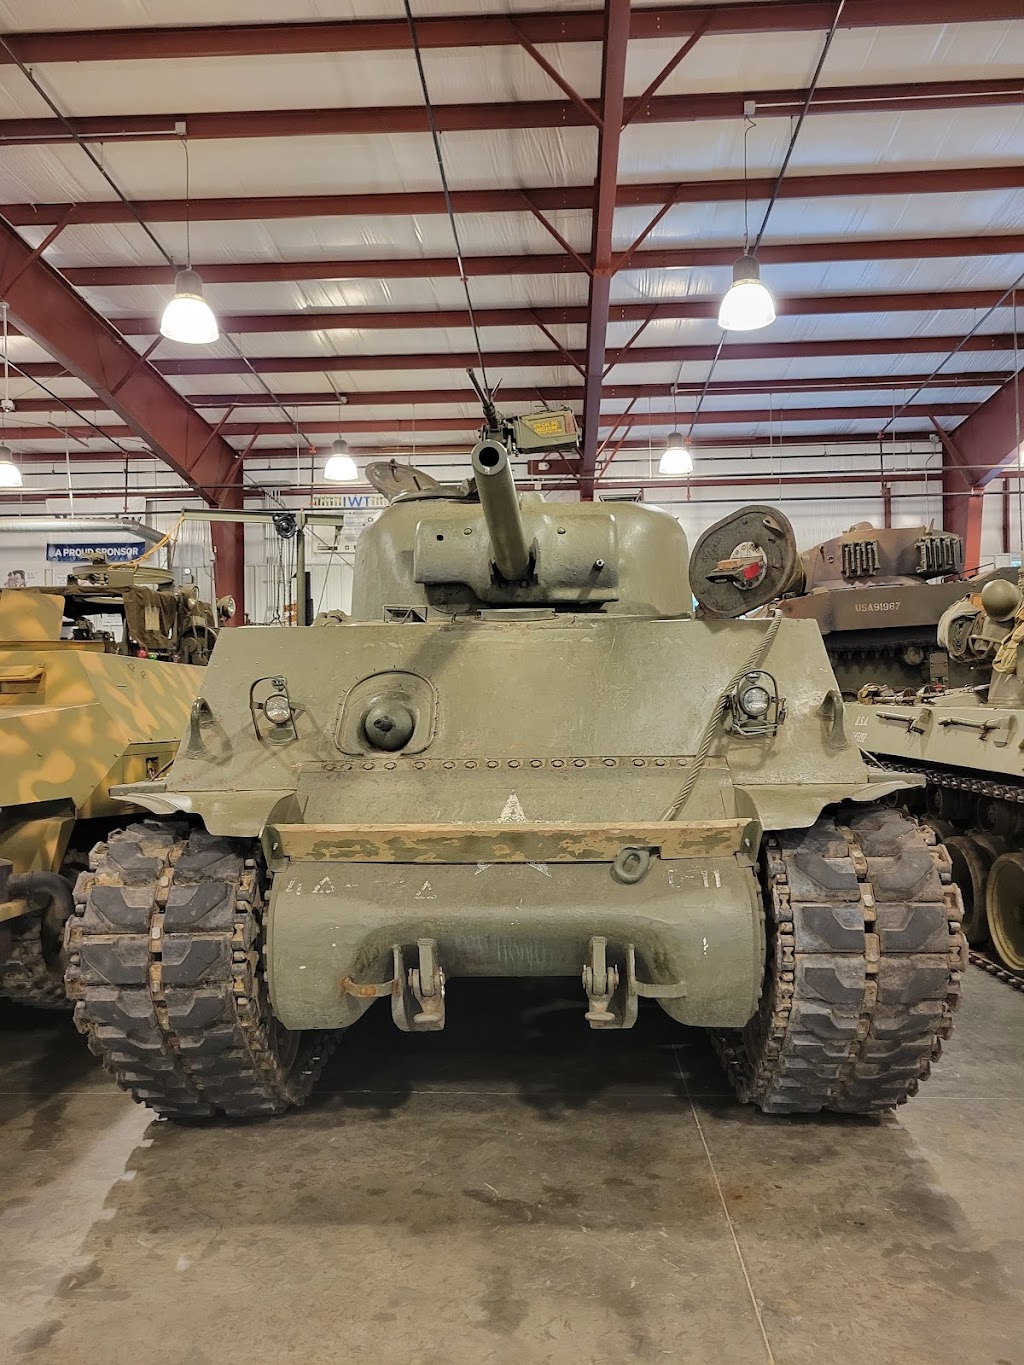 Museum of American Armor | 1303 Round Swamp Rd, Old Bethpage, NY 11804 | Phone: (516) 454-8265